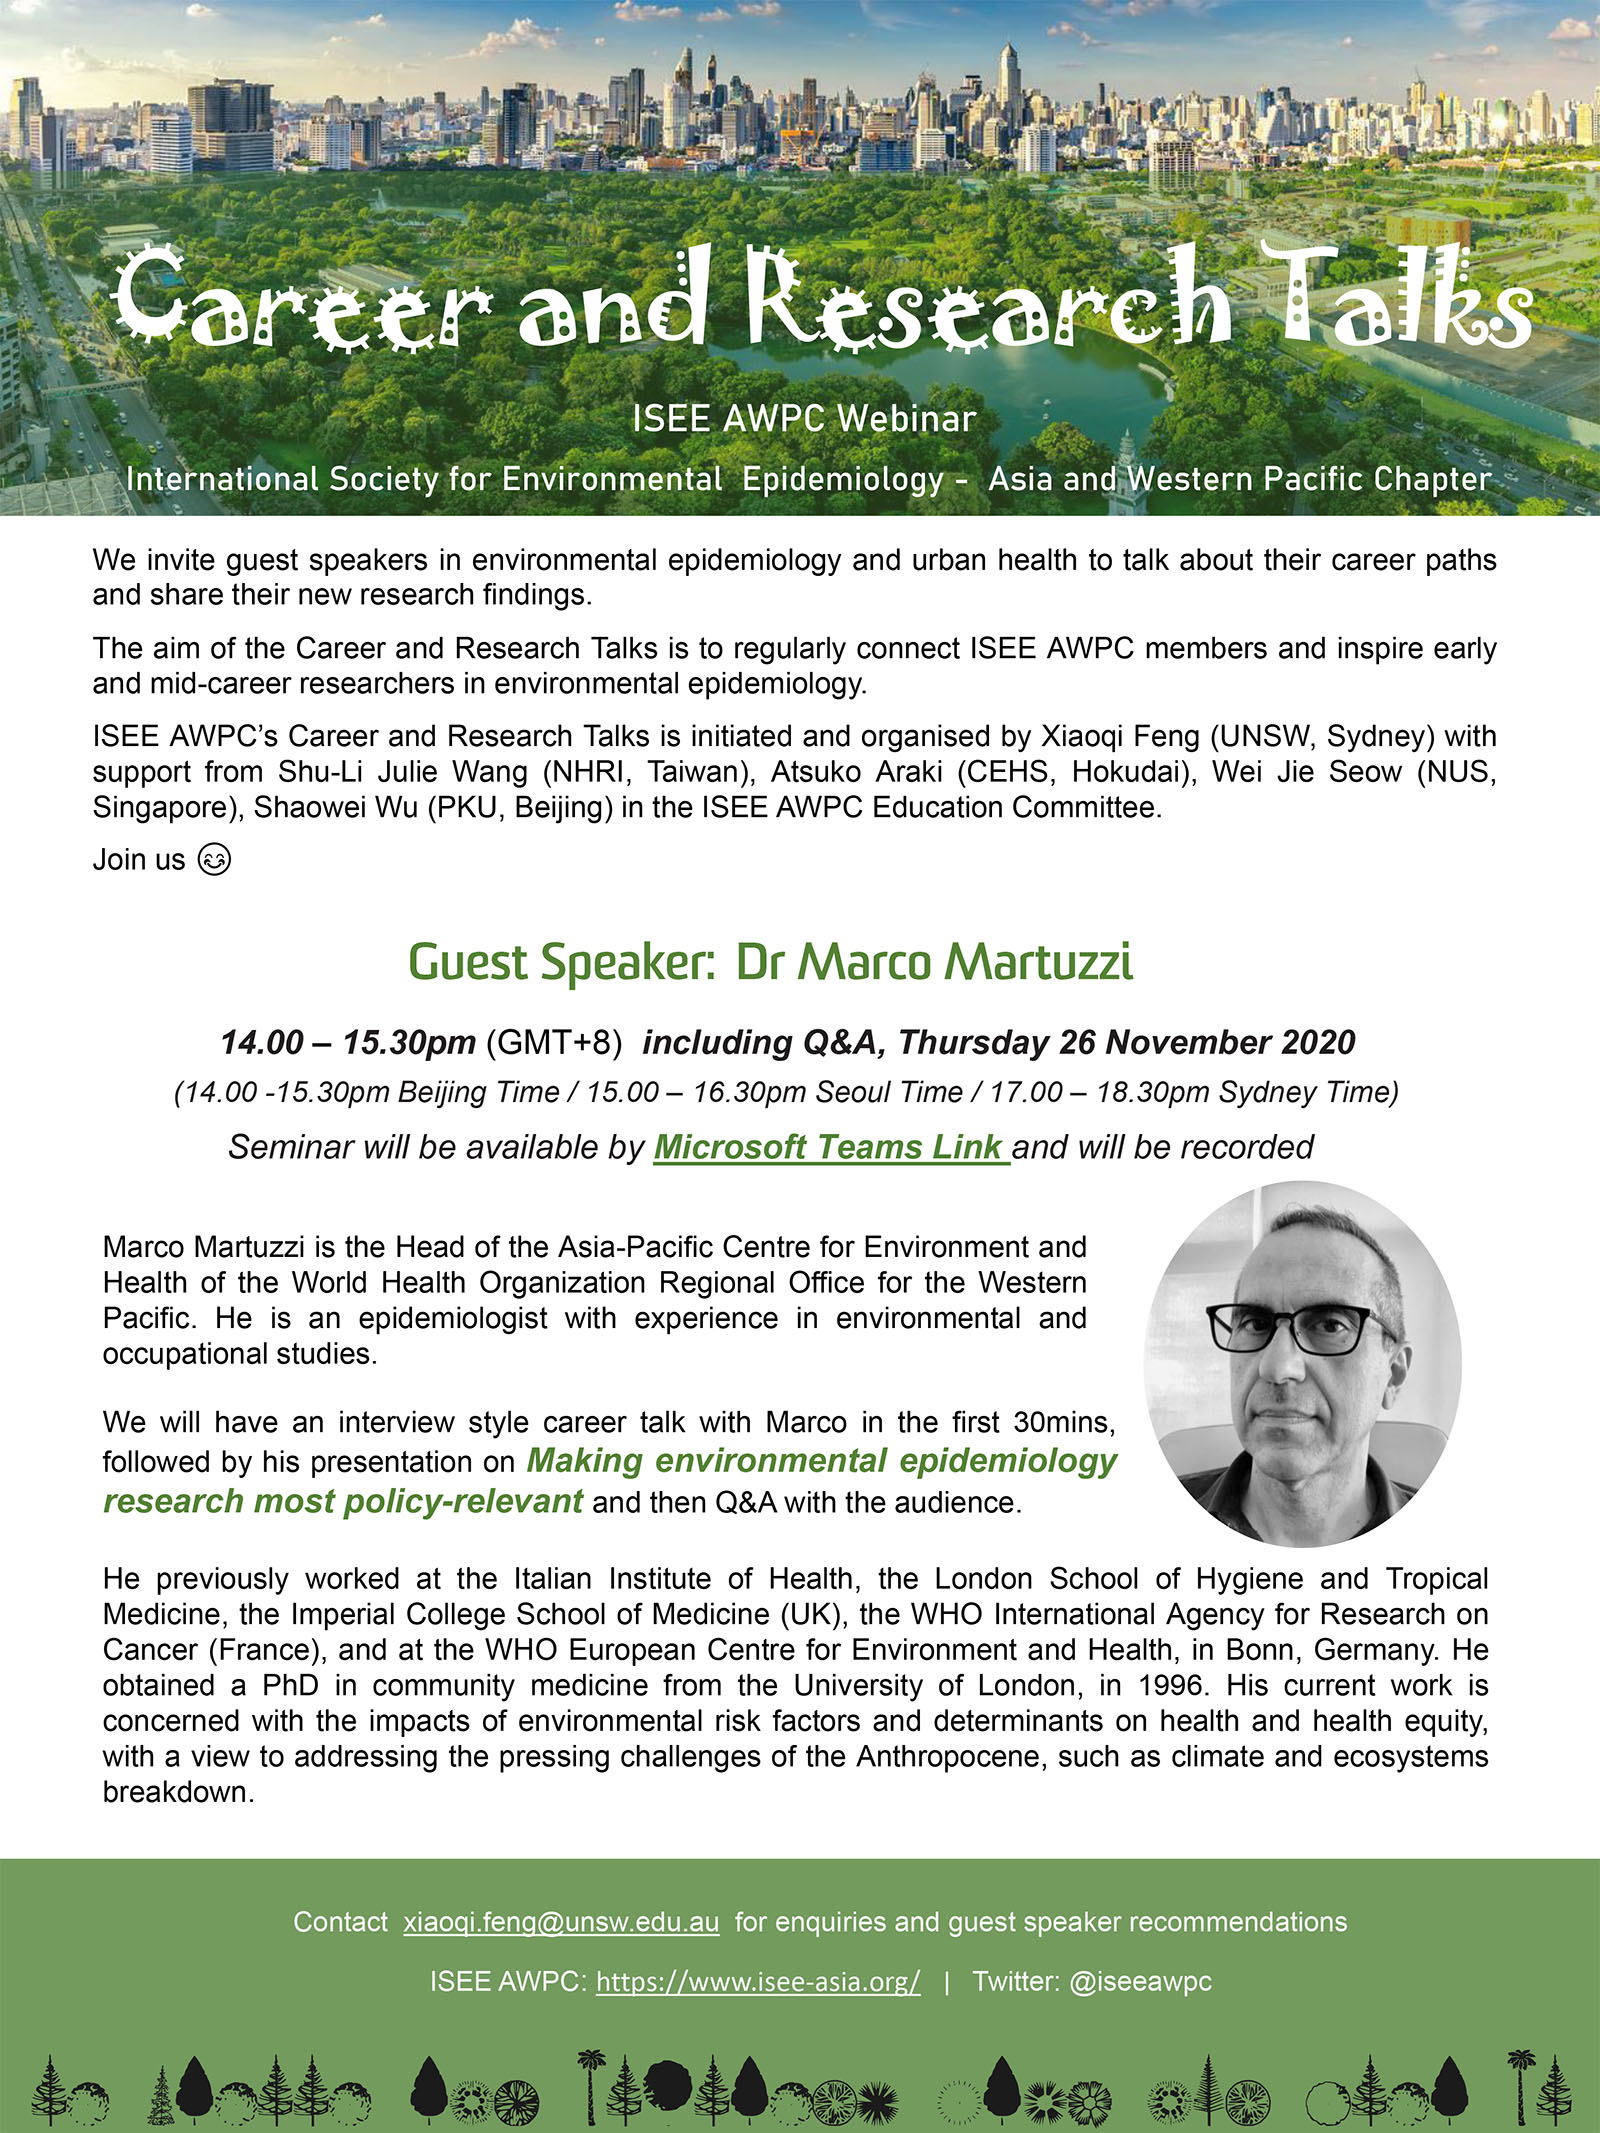 Career and Research Talk_Dr Marco Martuzzi_WHO_26  Nov 2020.jpg